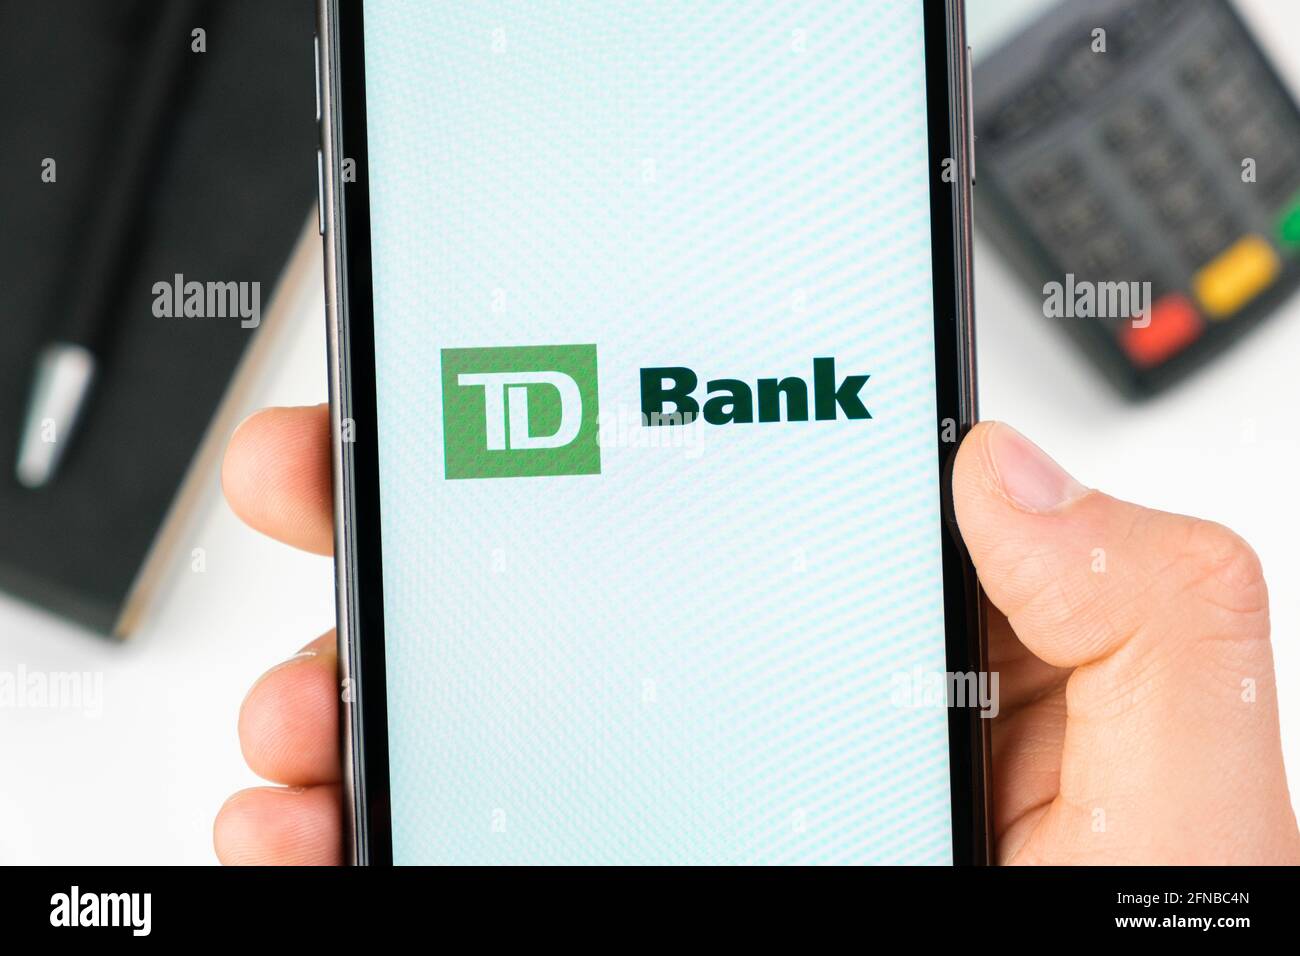 TD bank logo on the smartphone screen in mans hand on the background of payment terminal, May 2021, San Francisco, USA Stock Photo